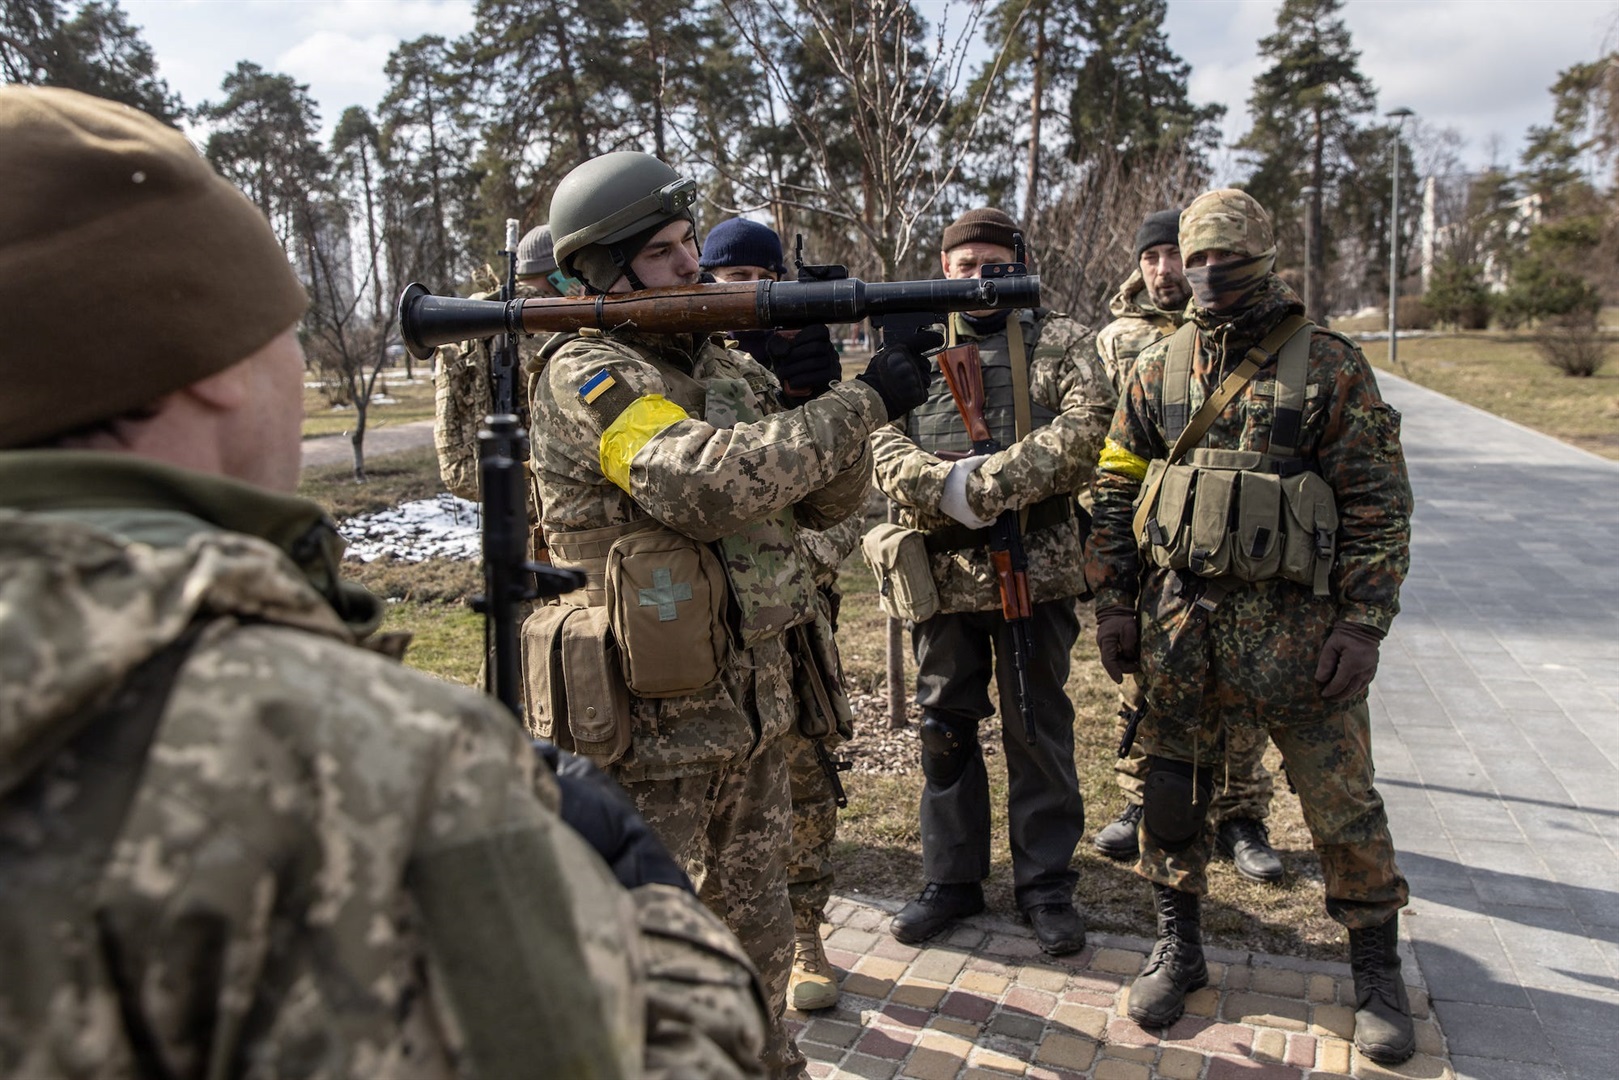 Members of the Territorial Defence Forces learn how to use weapons during a training session held in a public park on March 9, 2022 in Kyiv, Ukraine.